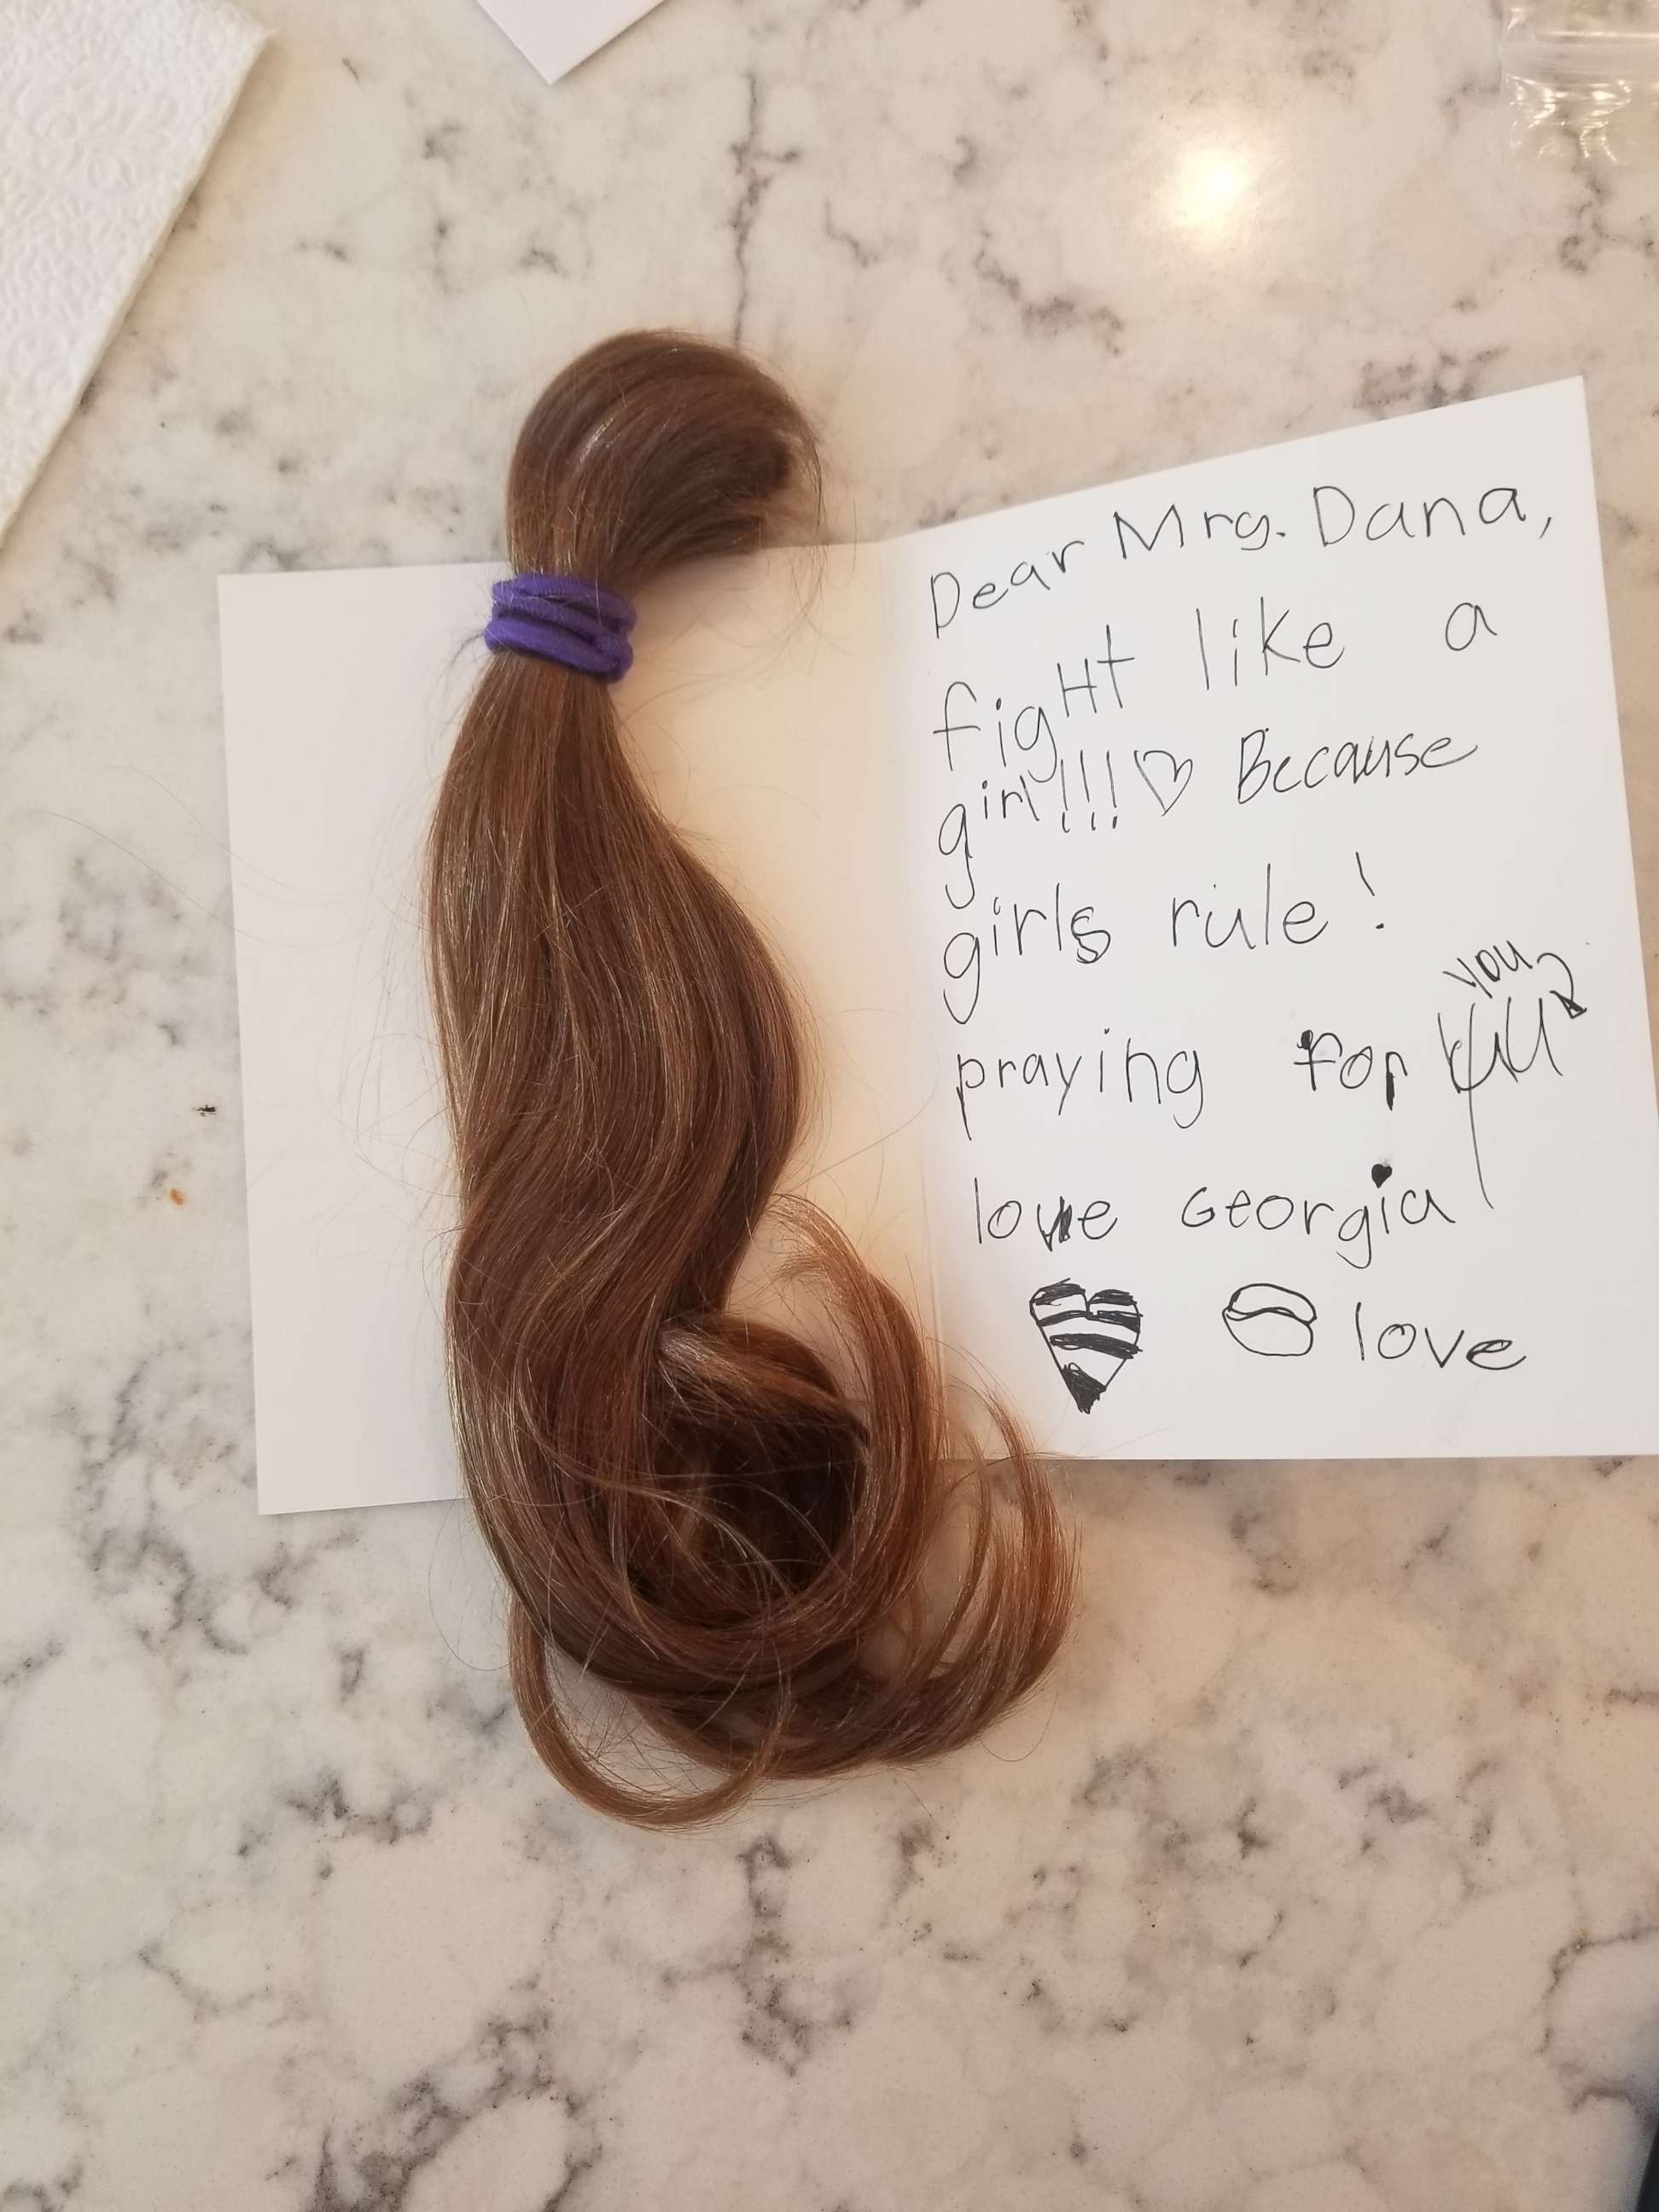 PHOTO: A 7-year-old girl donated her hair to Dana McSwain, who is battling cancer.